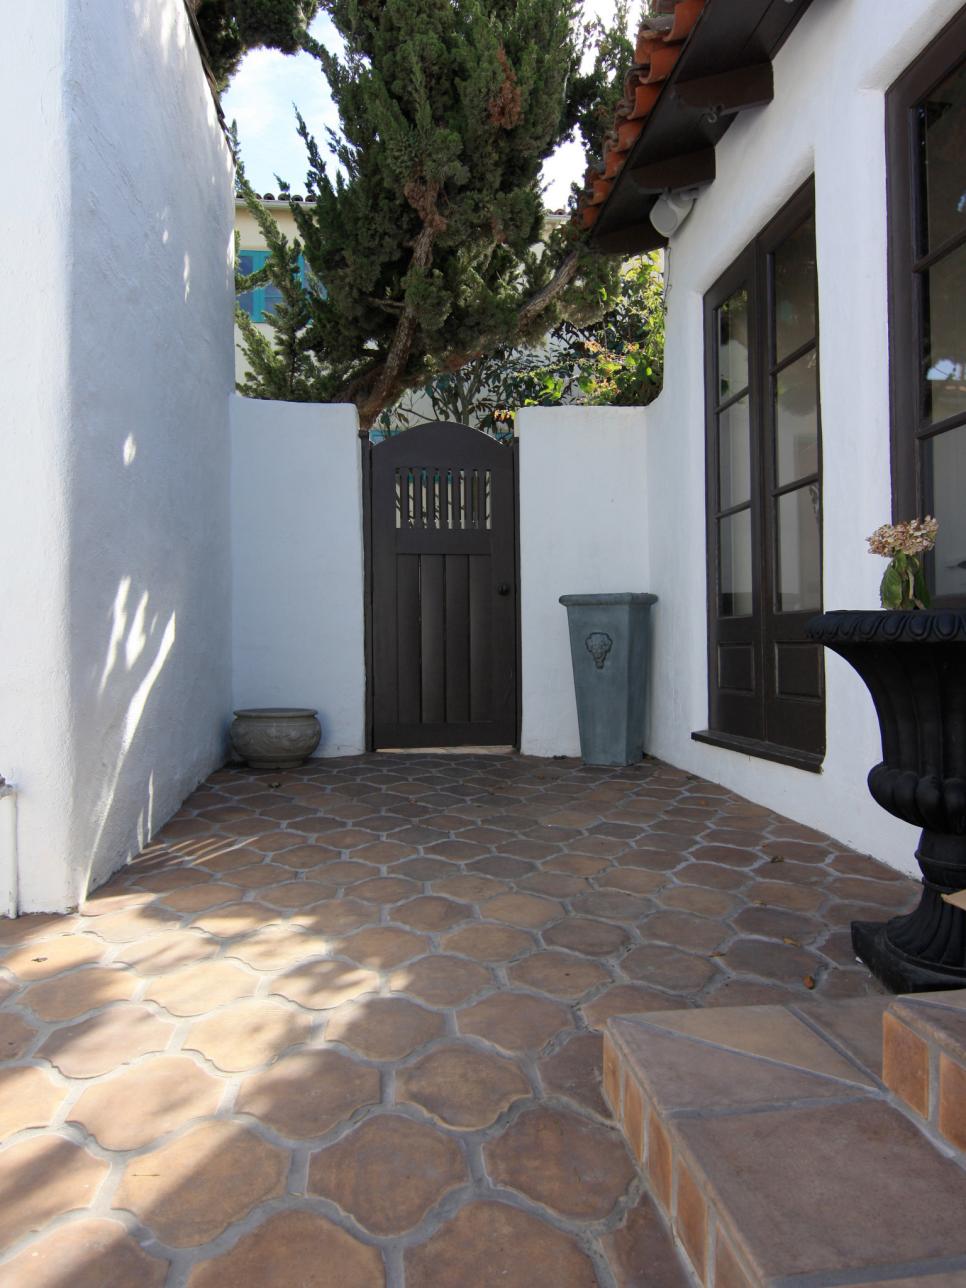 Courtyard With White Home Exterior, Red Roof and Terra-Cotta Pavers